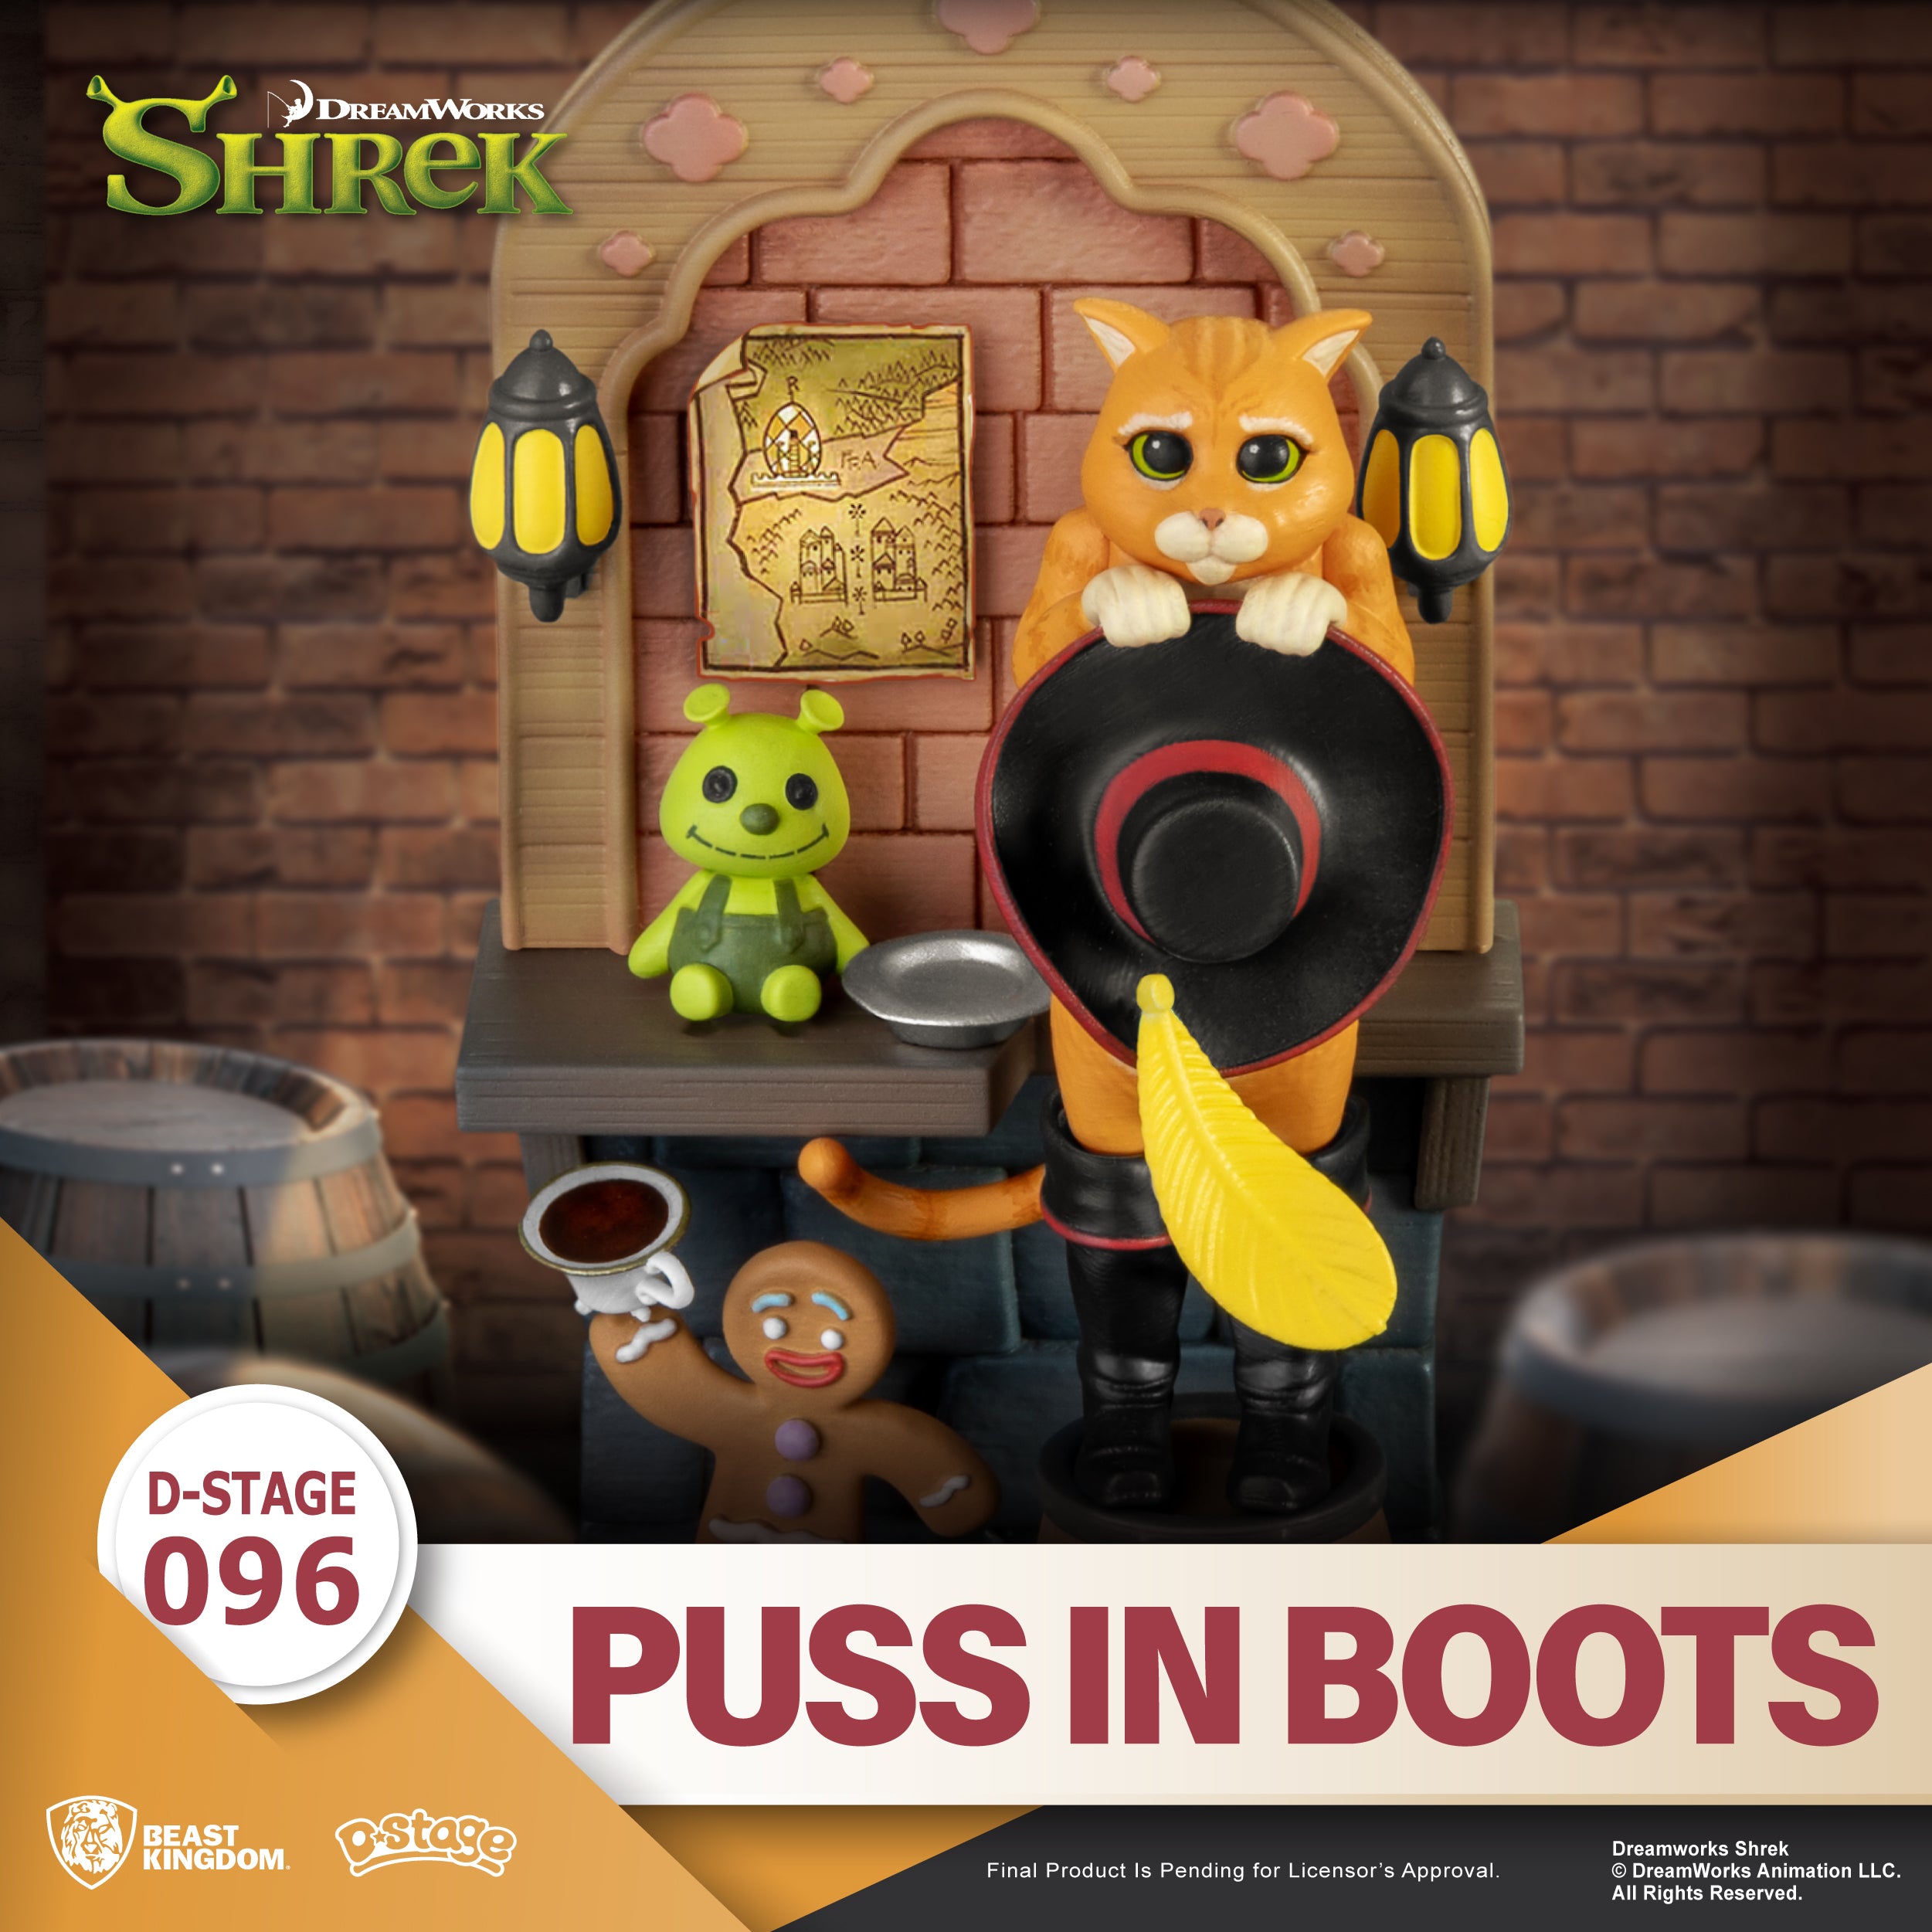 Beast Kingdom DS-096 Shrek: Puss In Boots Diorama Stage D-Stage Figure Statue